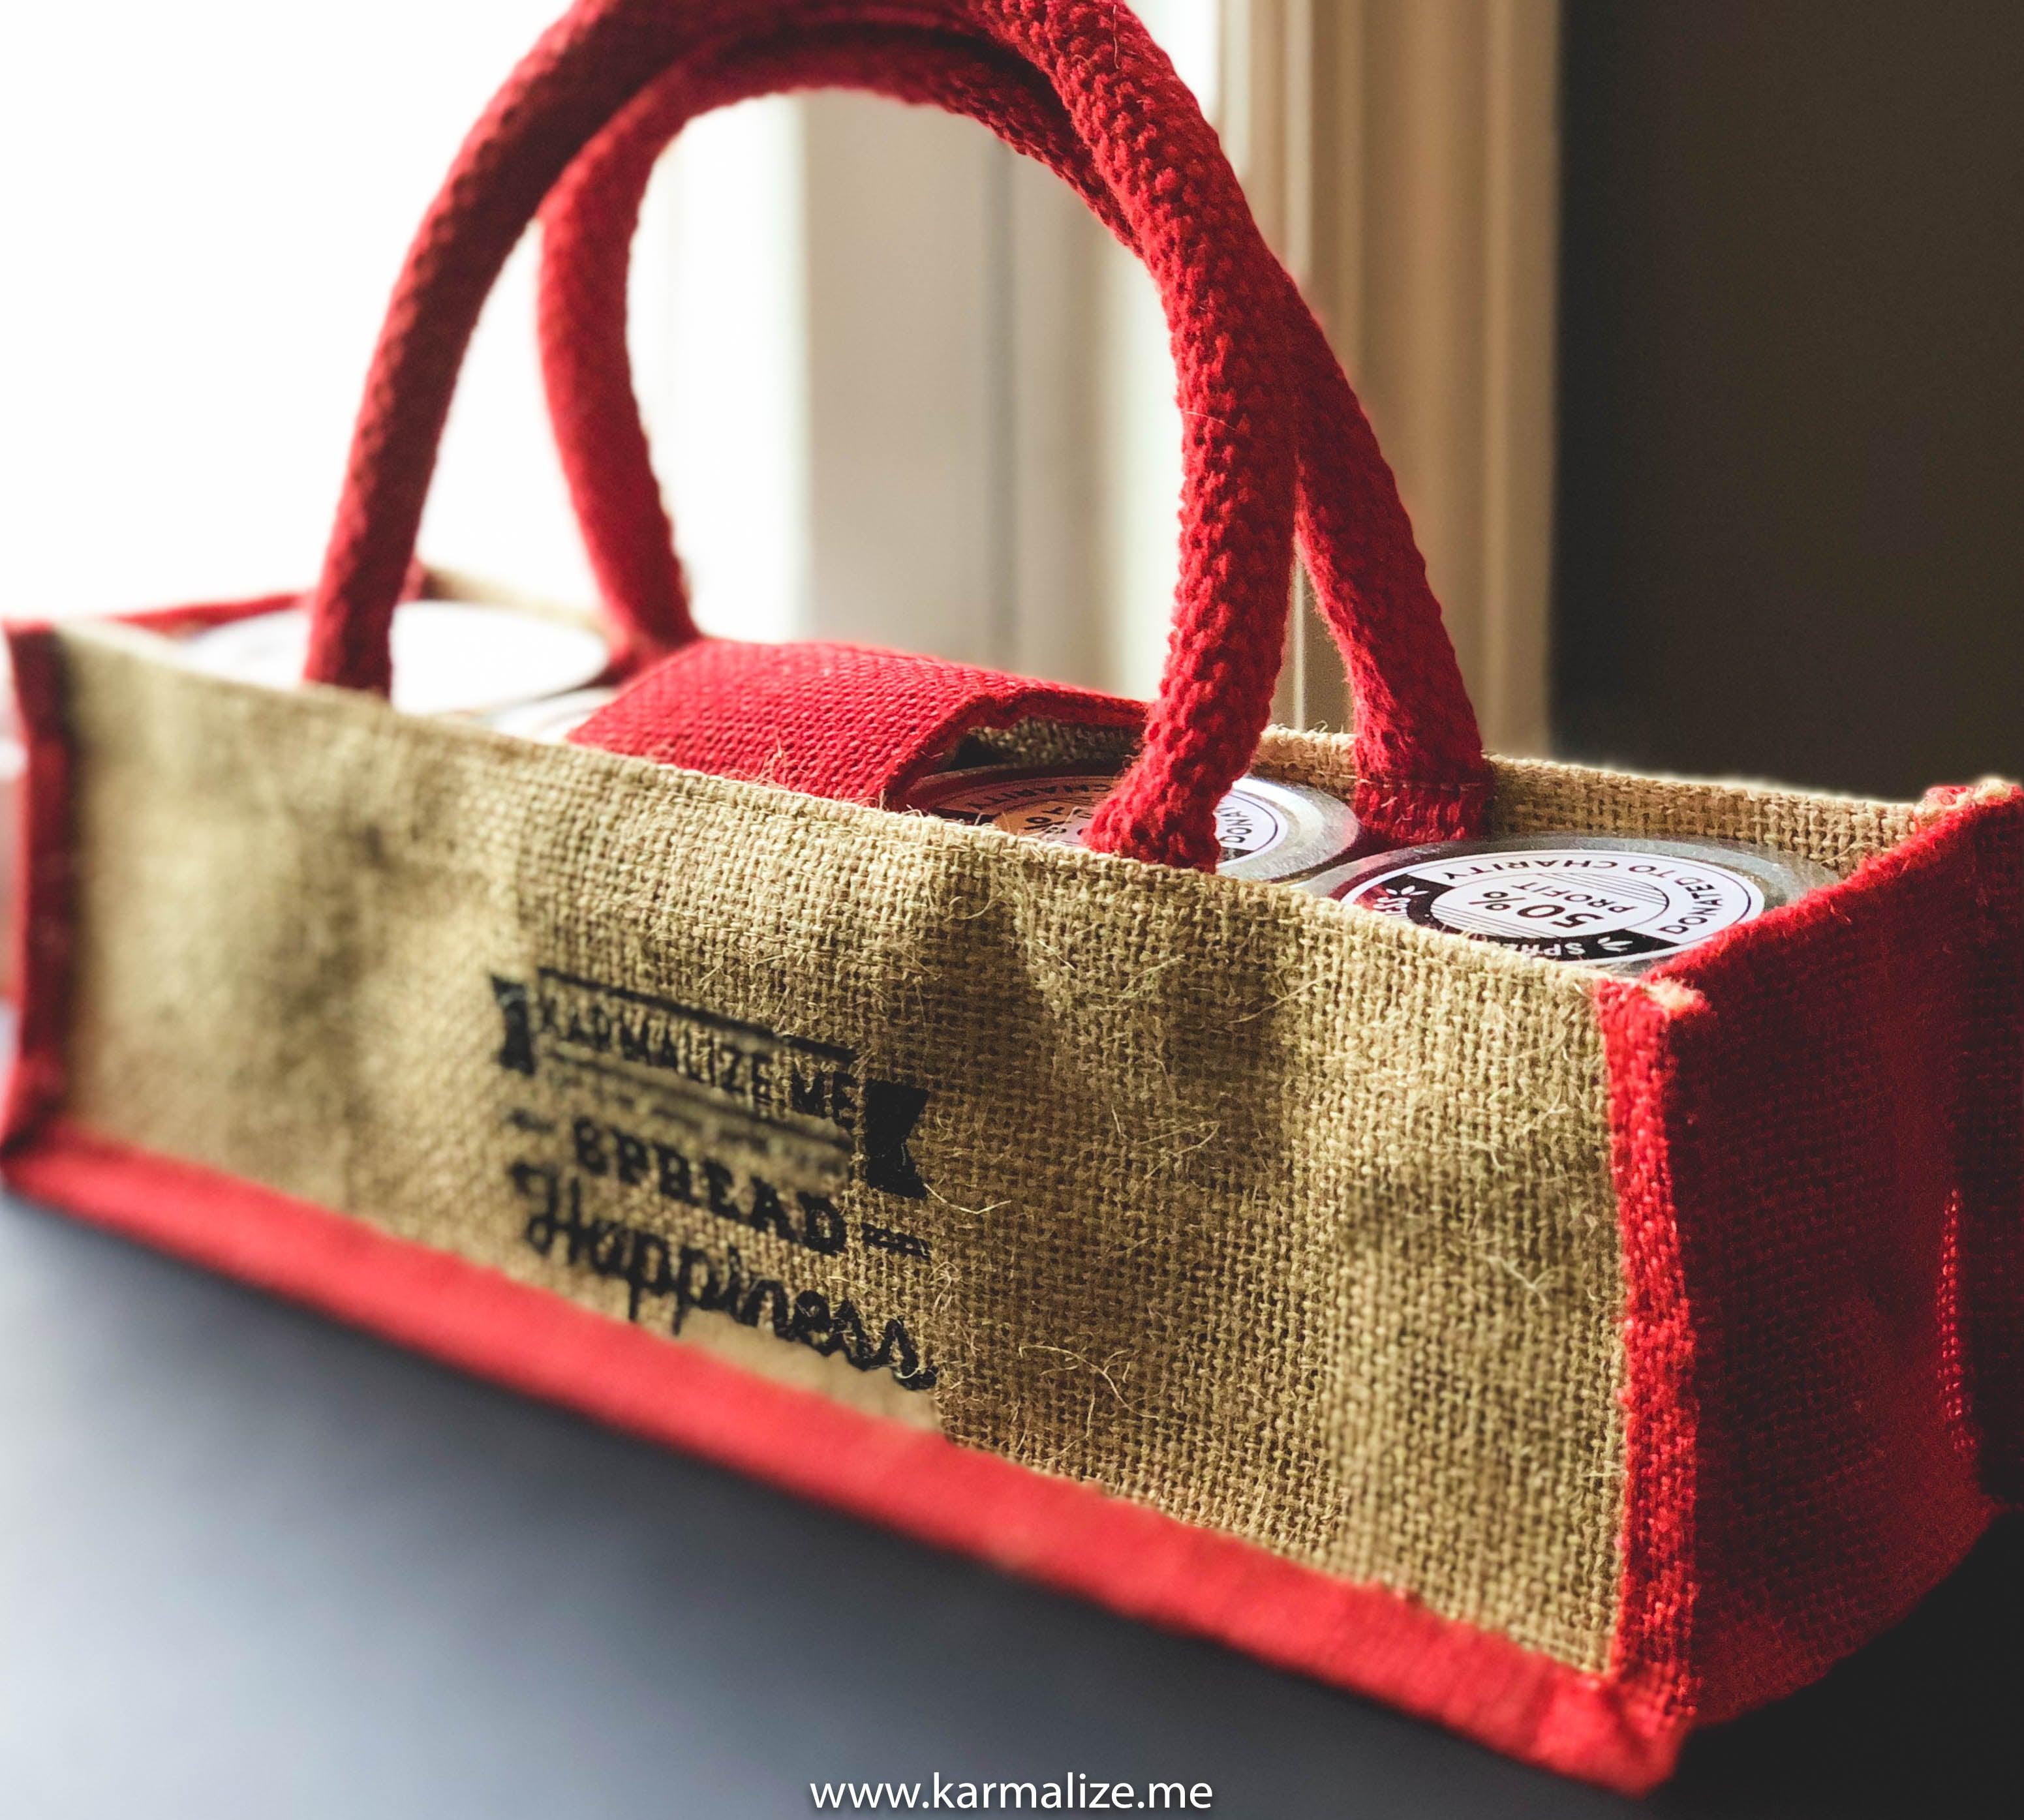 Jute Bag for Nut Butters - (Nut butters not included).  Back